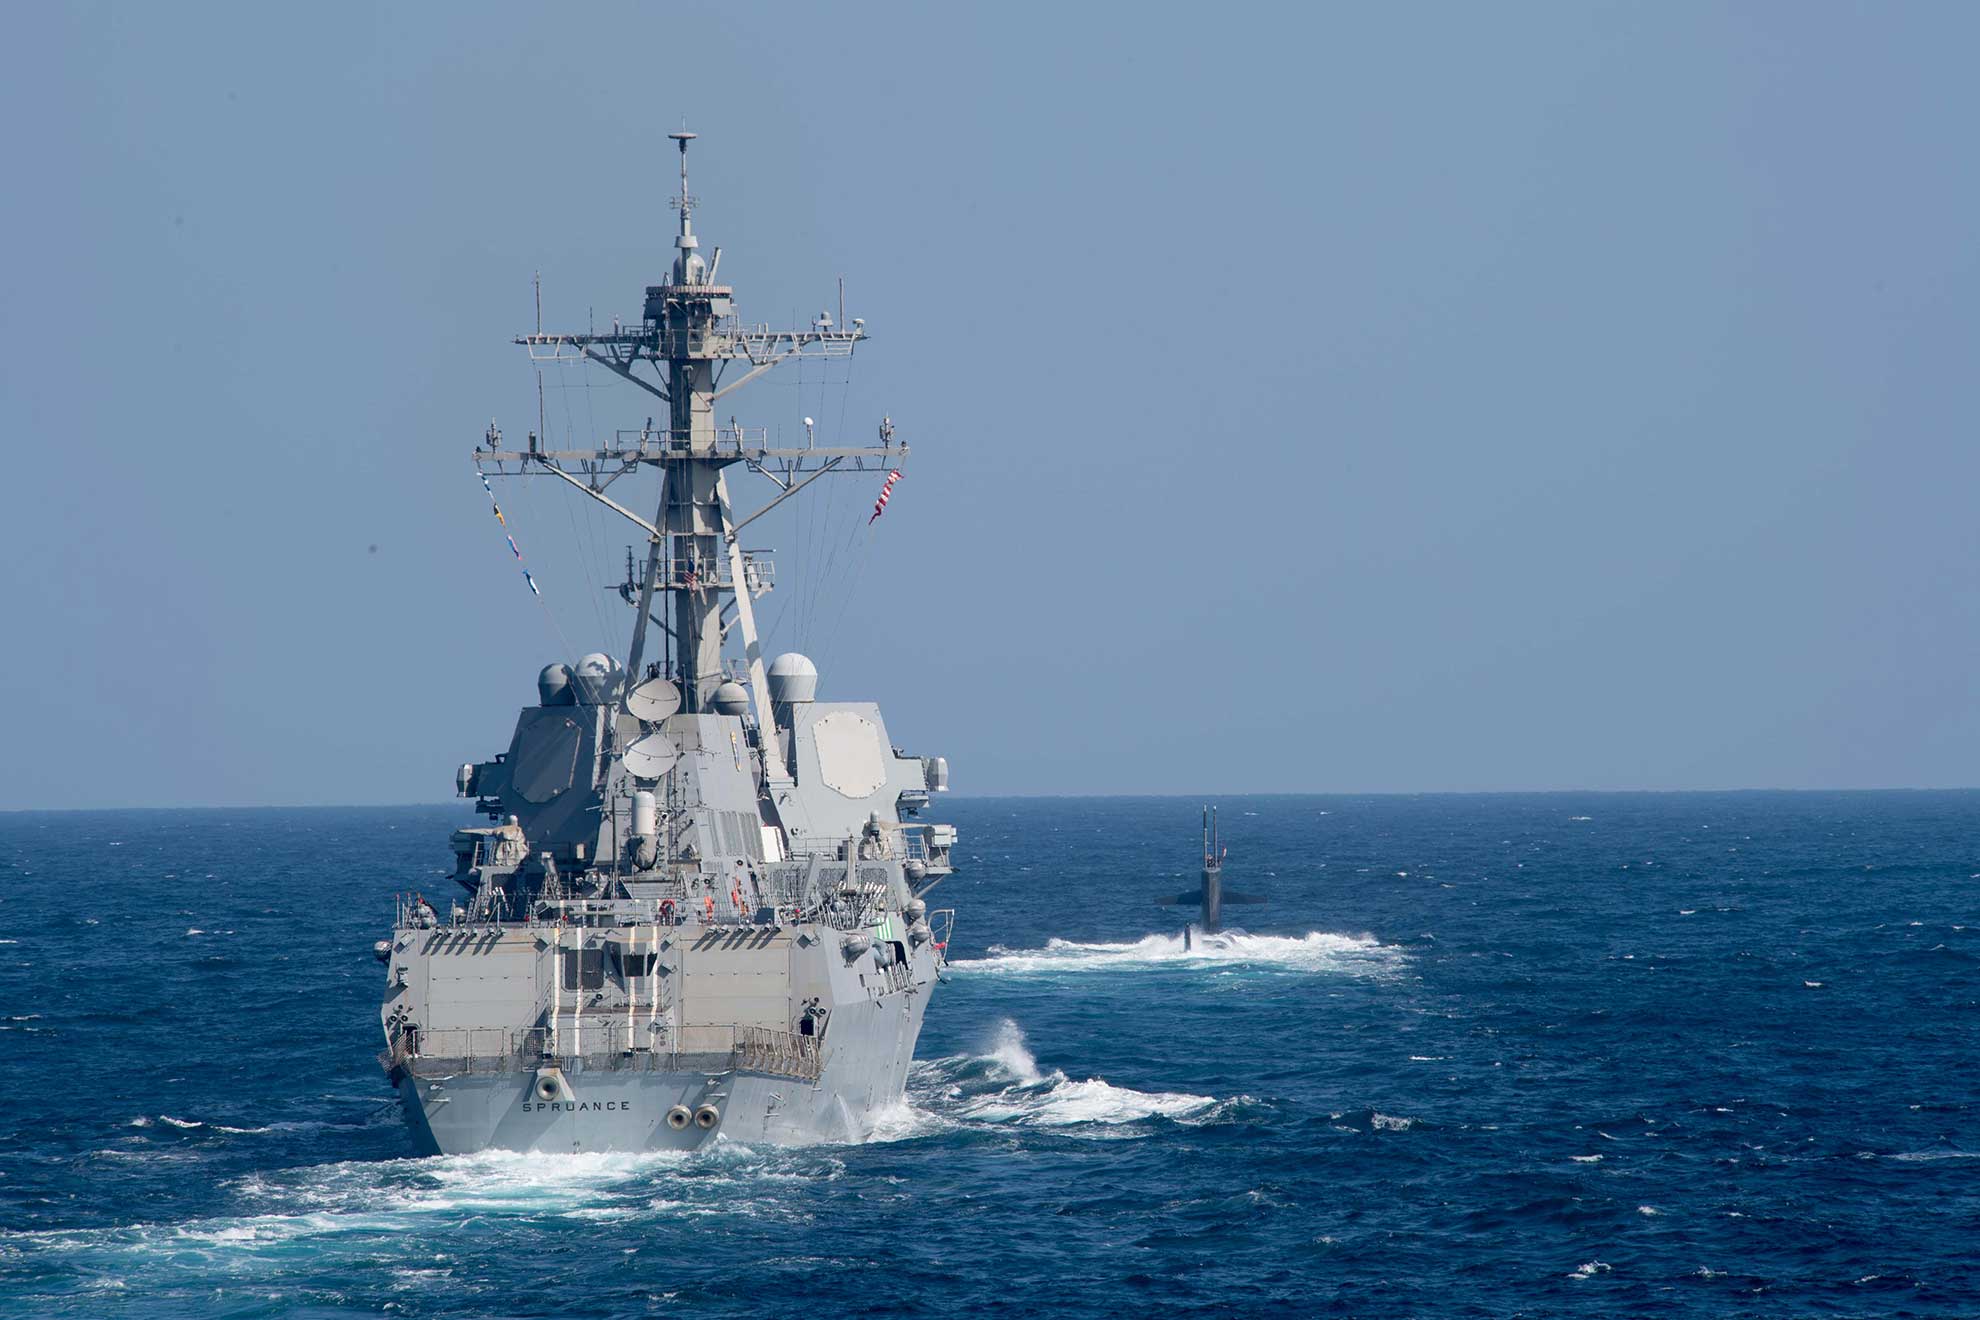 Arabian Sea (Dec. 18, 2018) The guided-missile destroyer USS Spruance (DDG 111) and the fast attack submarine USS Louisville (SSN 724) are underway in formation during the anti-submarine warfare exercise SHAREM 195 in the Arabian Sea, Dec. 18, 2018. Spruance is deployed to the U.S. 5th Fleet area of operations in support of naval operations to ensure maritime stability and security in the Central Region, connecting the Mediterranean and the Pacific through the western Indian Ocean and three strategic choke points -- U.S. Navy photo by MCS2 Abigayle Lutz. -